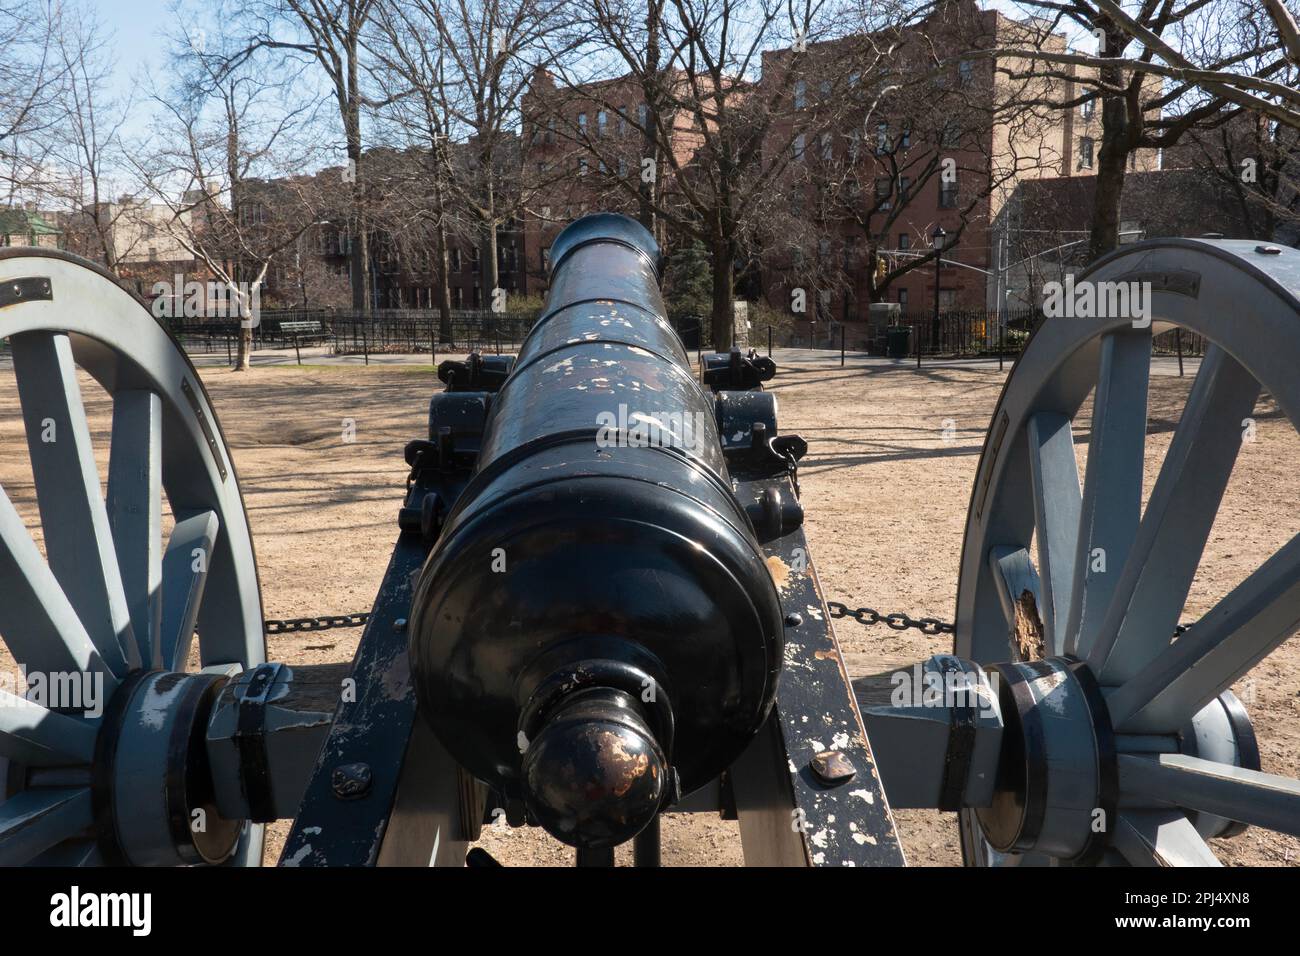 A replica of a revolutionary war English Field cannon in Bennet Park in Washington Heights, Manhattan, New York Stock Photo